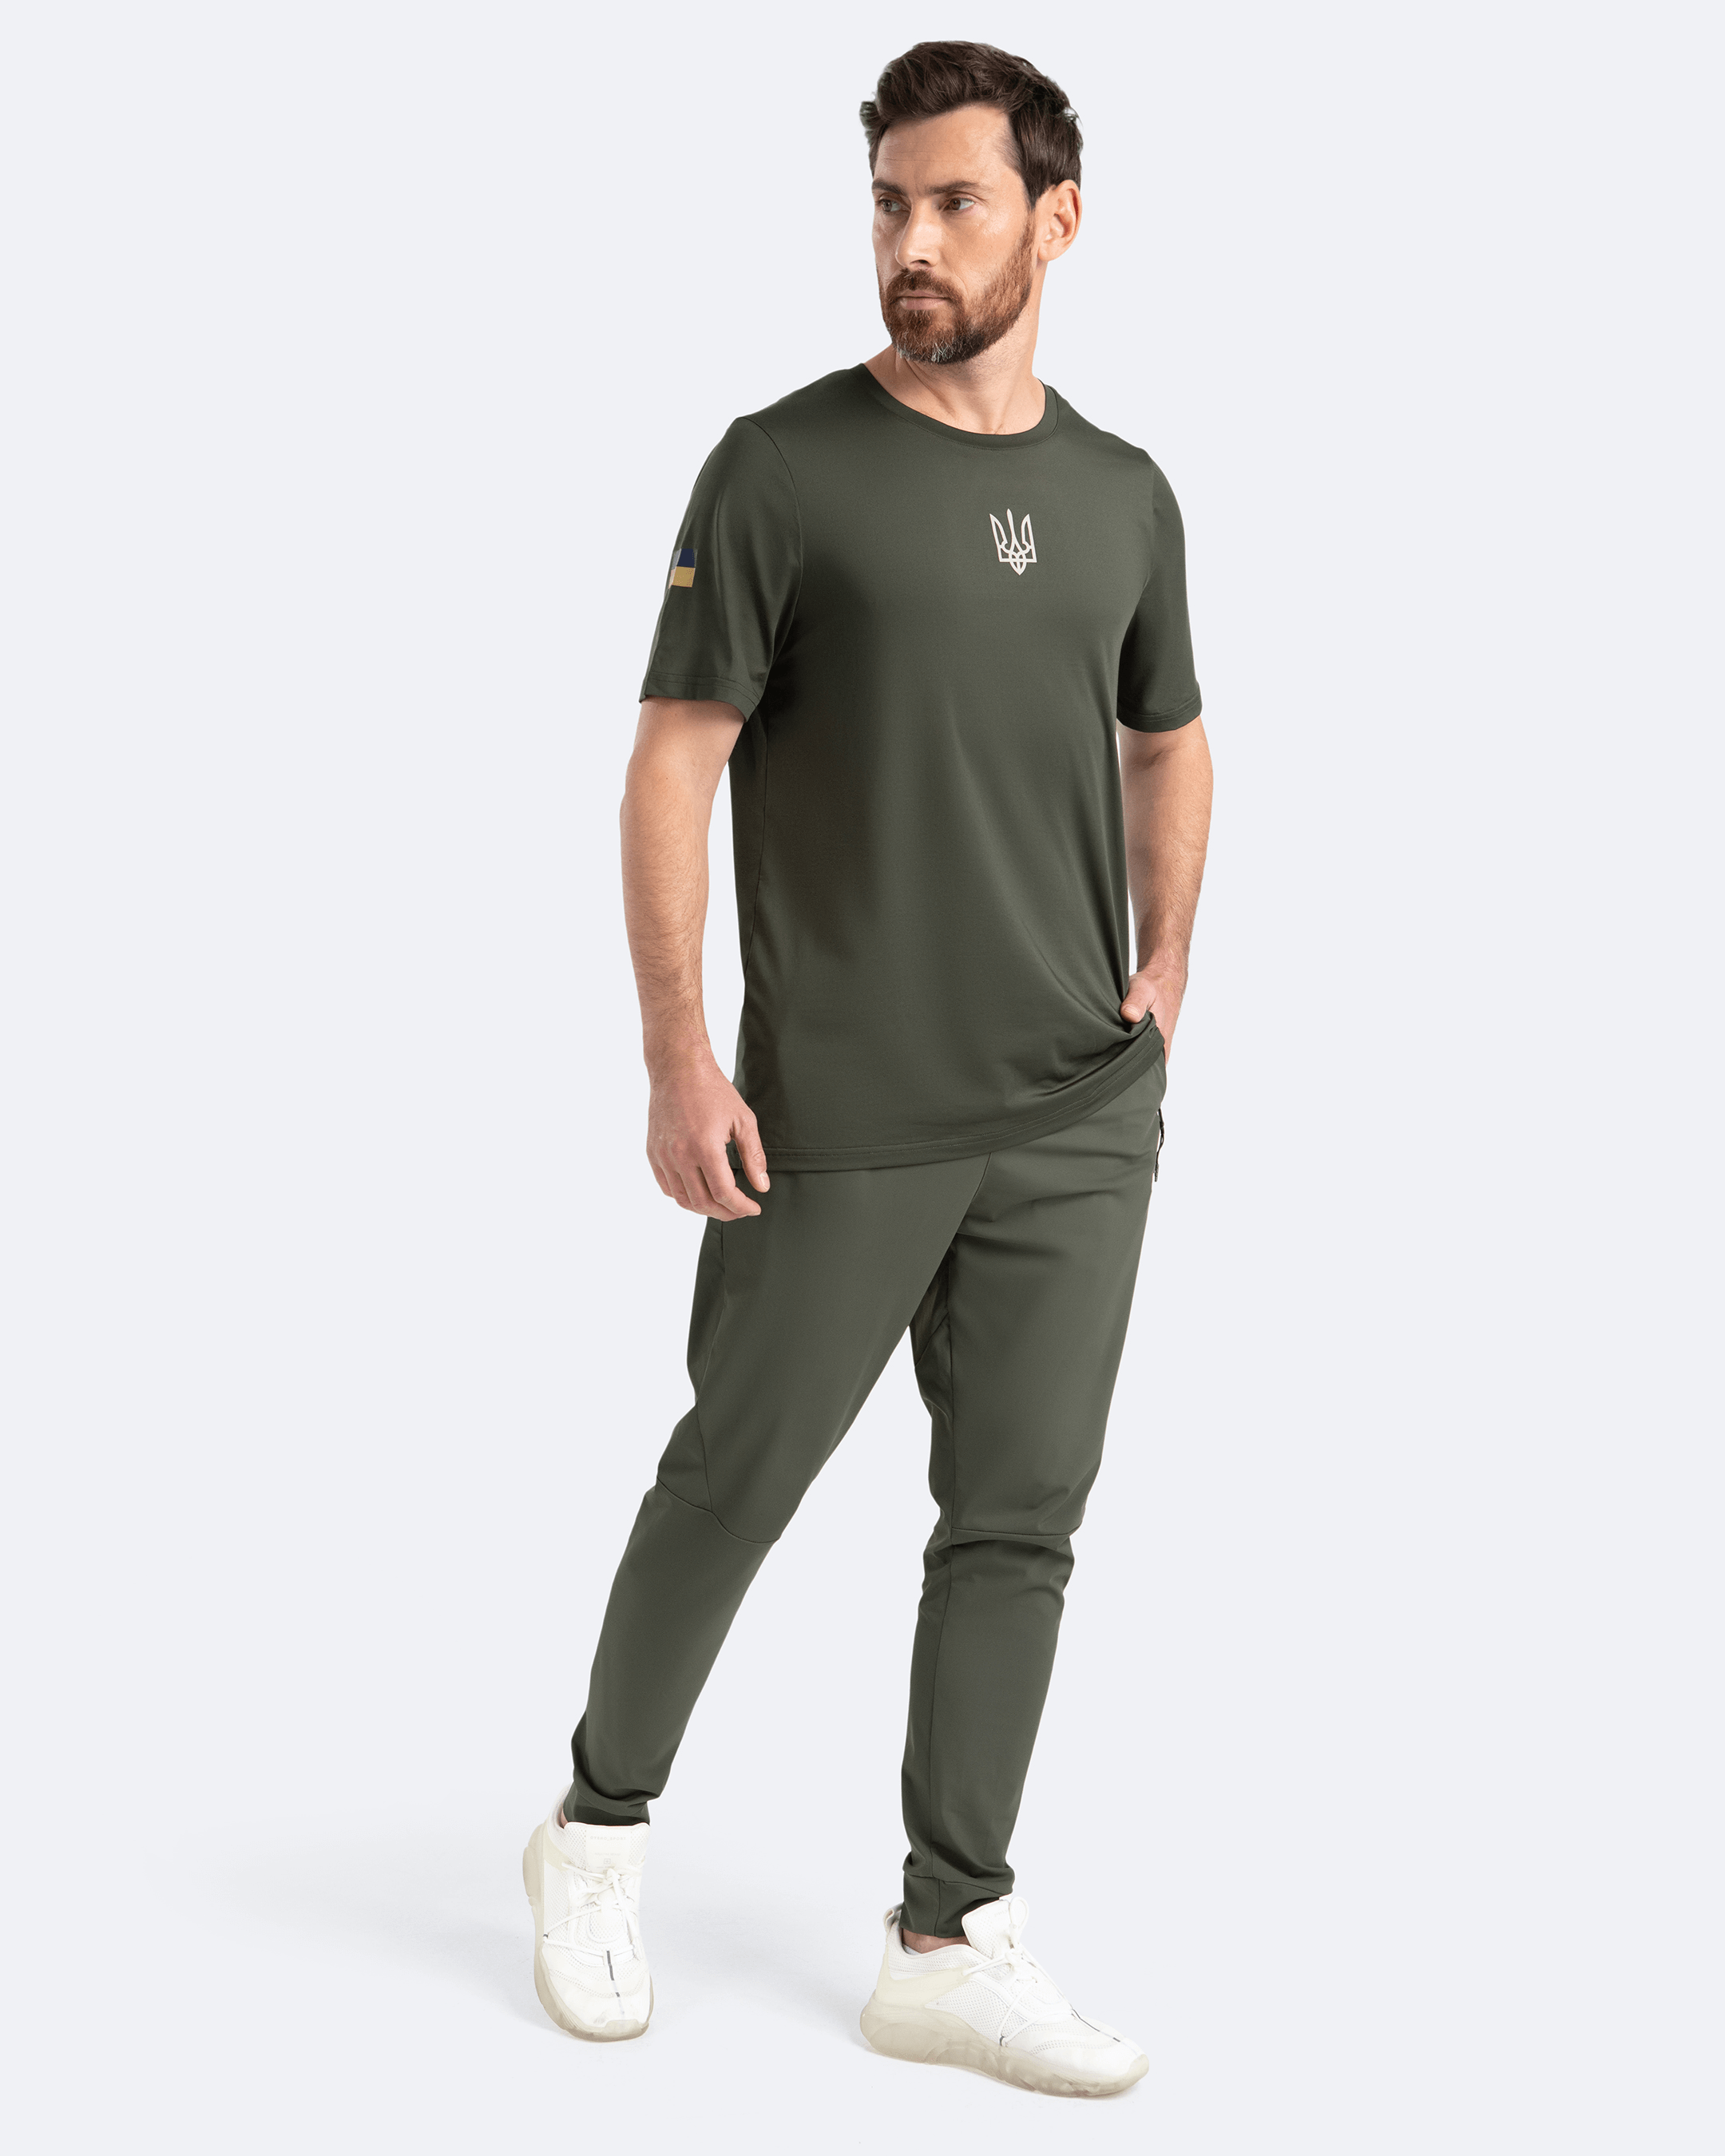 Brown T Shirt & Green Joggers Outfit - TK Maxx UK